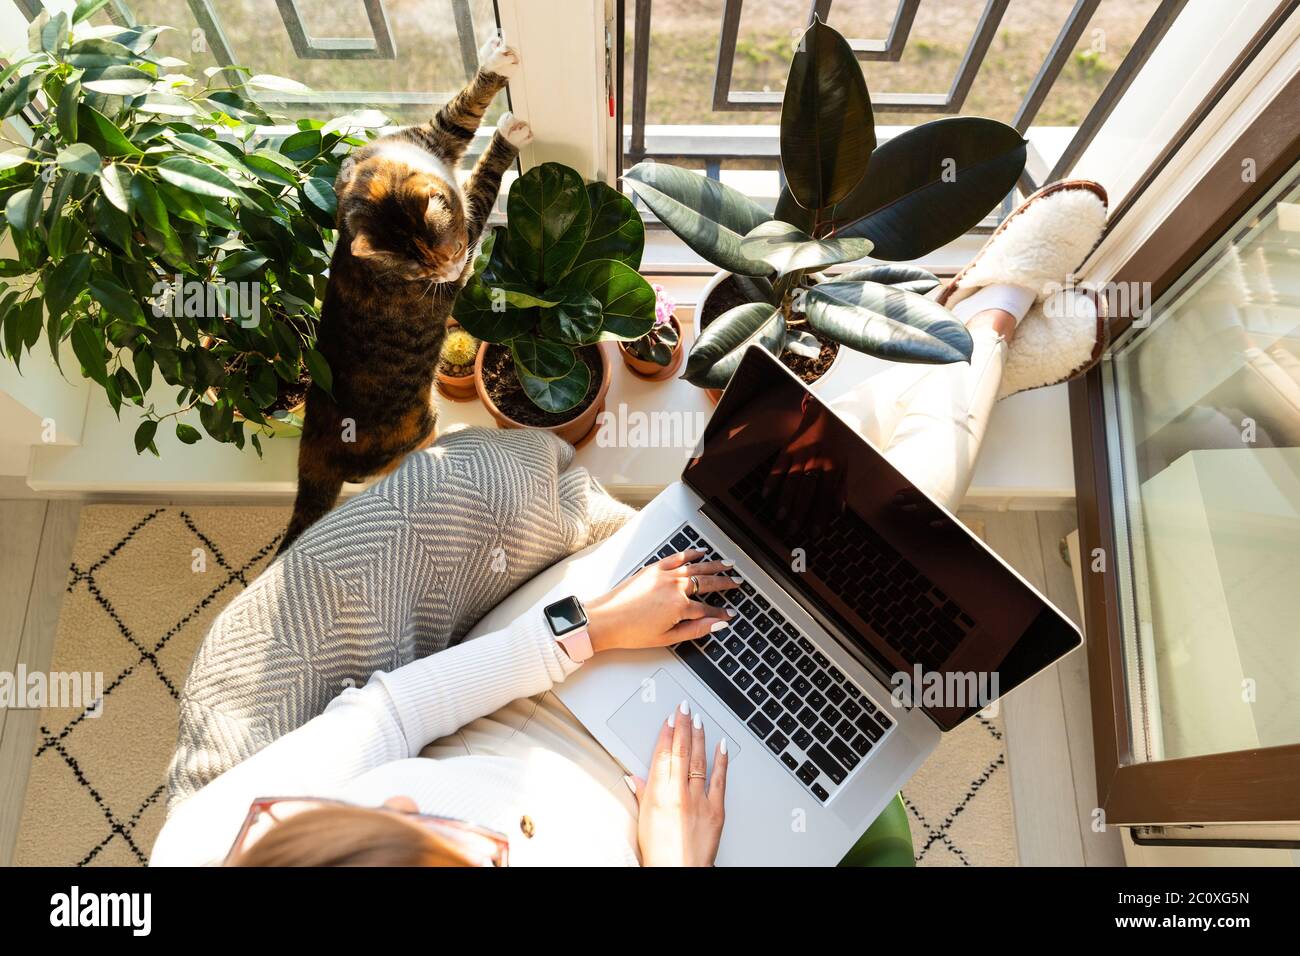 Woman sitting on armchair and putting your feet on the windowsill, works on laptop at home during self-isolation, cat nearby wants attention and to be Stock Photo